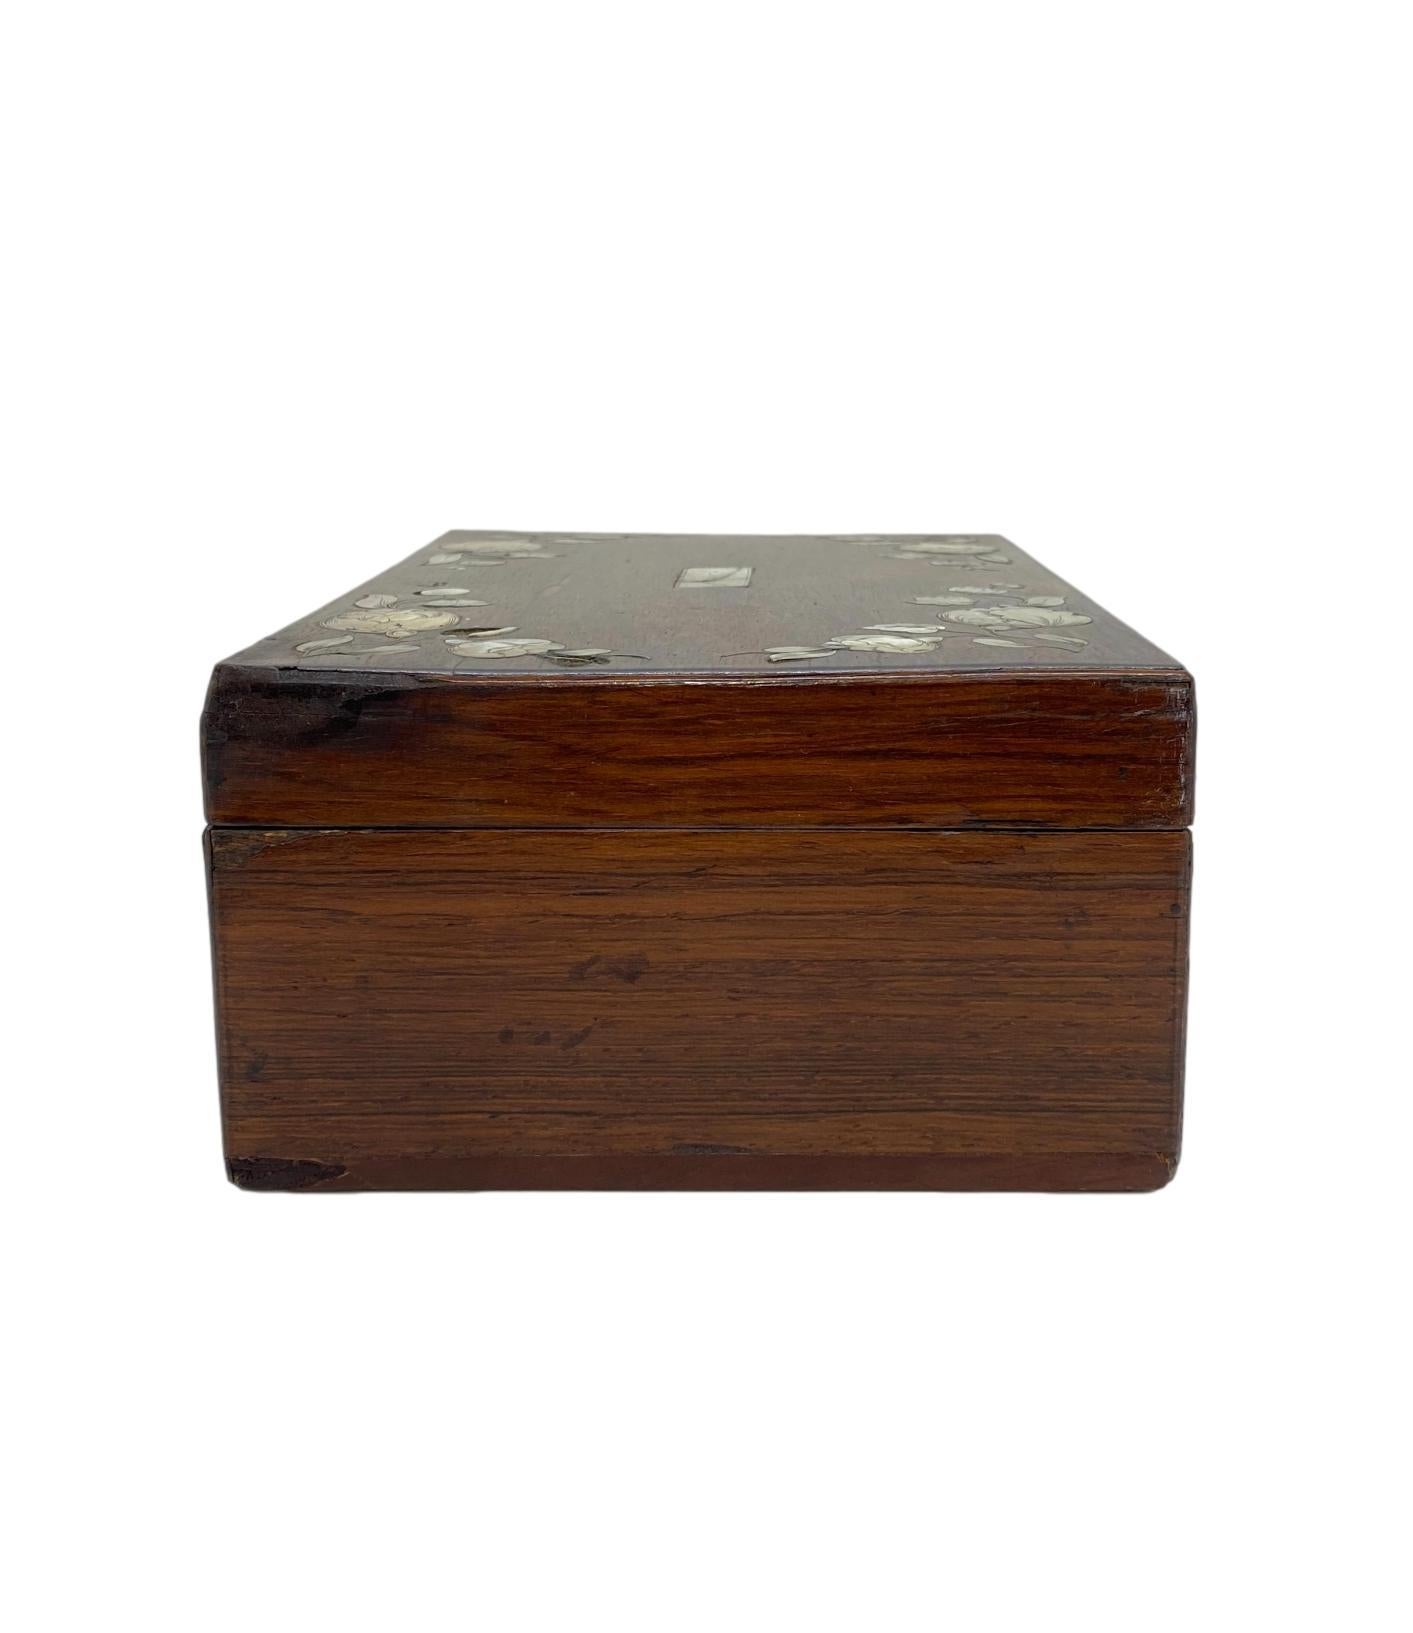 William IV Rosewood Stationery Box with Fine Inlaid Mother of Pearl Flowers, circa 1840